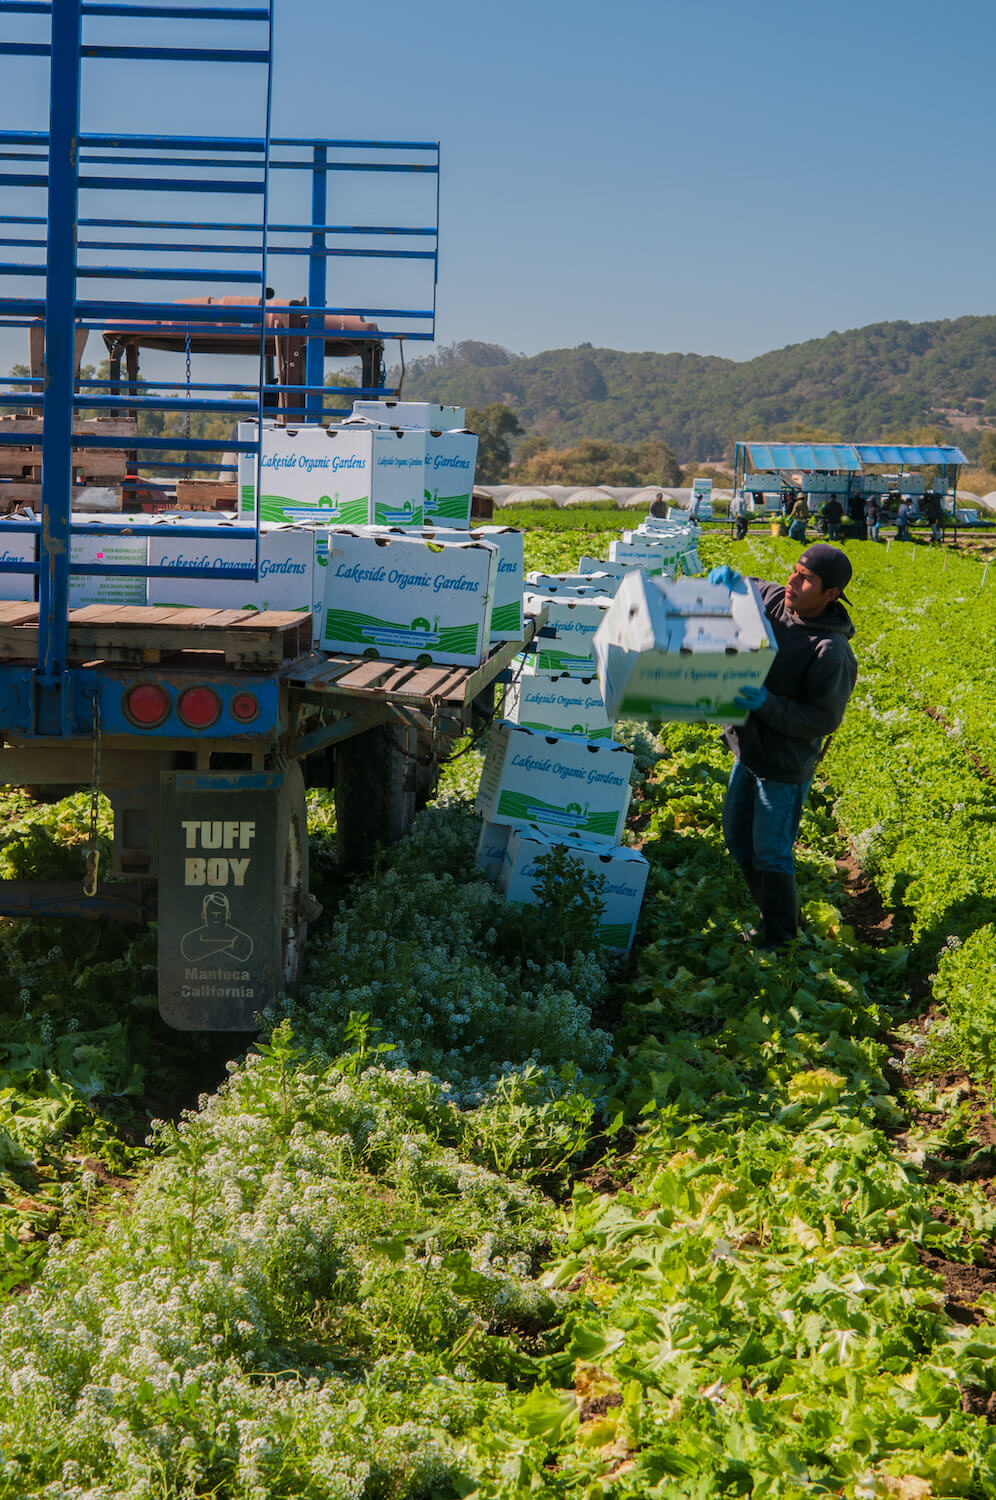 Migrant workers harvest Letttuce at Lakeside Organic Gardens in Watsonville, CA on Tuesday, Aug. 27, 2013.